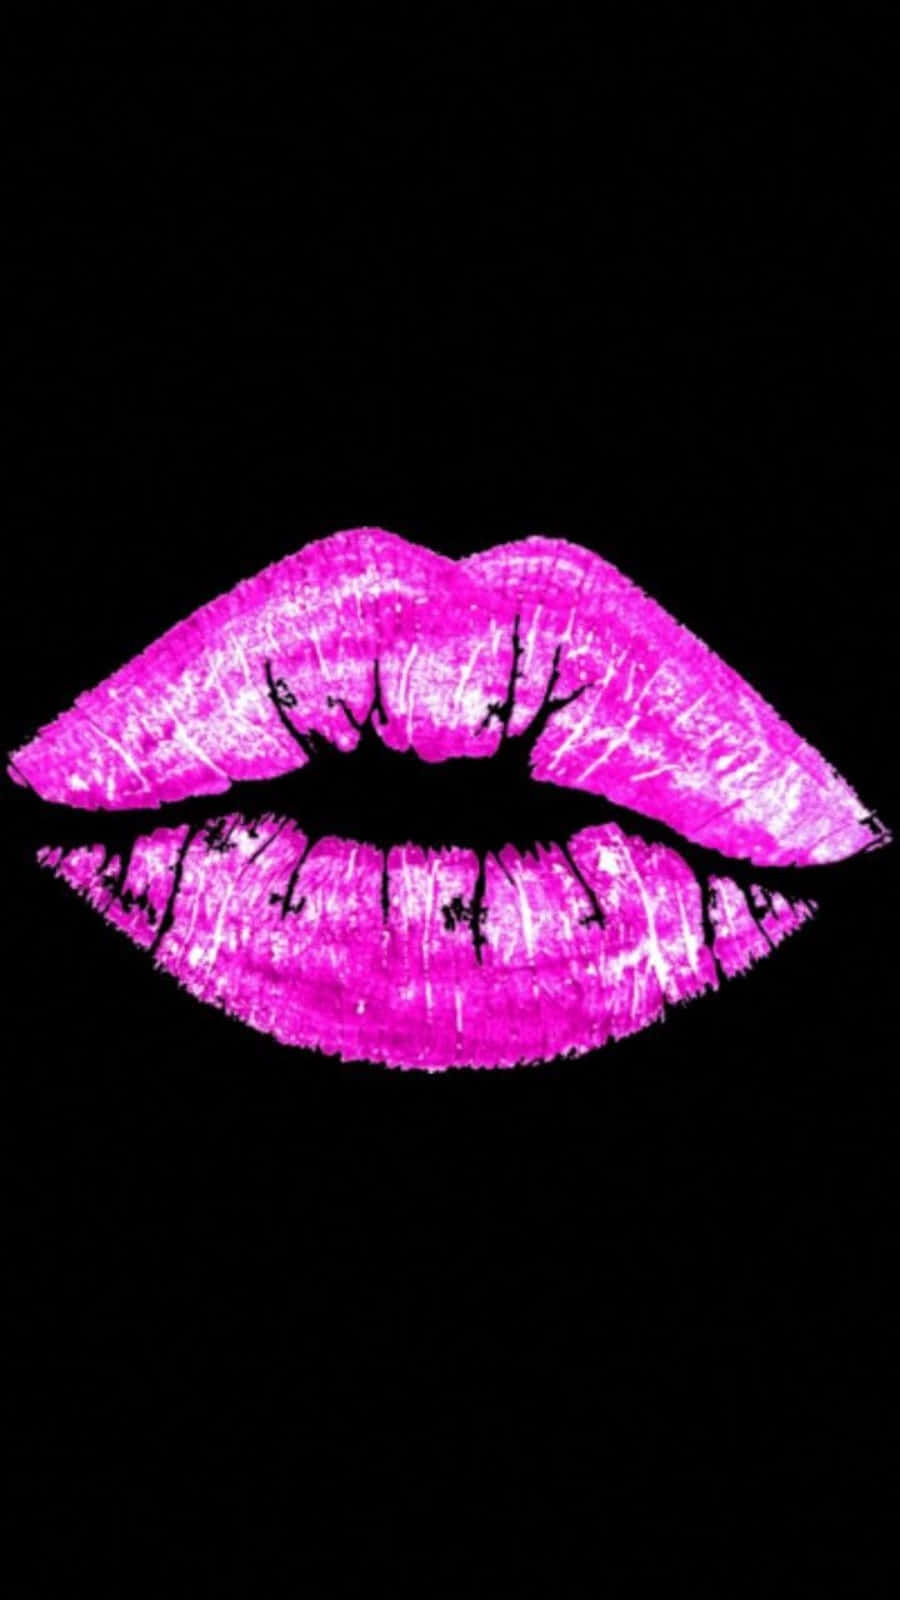 Pink lipstick kiss print set black background isolated close up, red sexy  lips mark makeup collection, neon light female kisses imprint, beauty make  up wallpaper, fashion banner, love & passion symbol Photos |